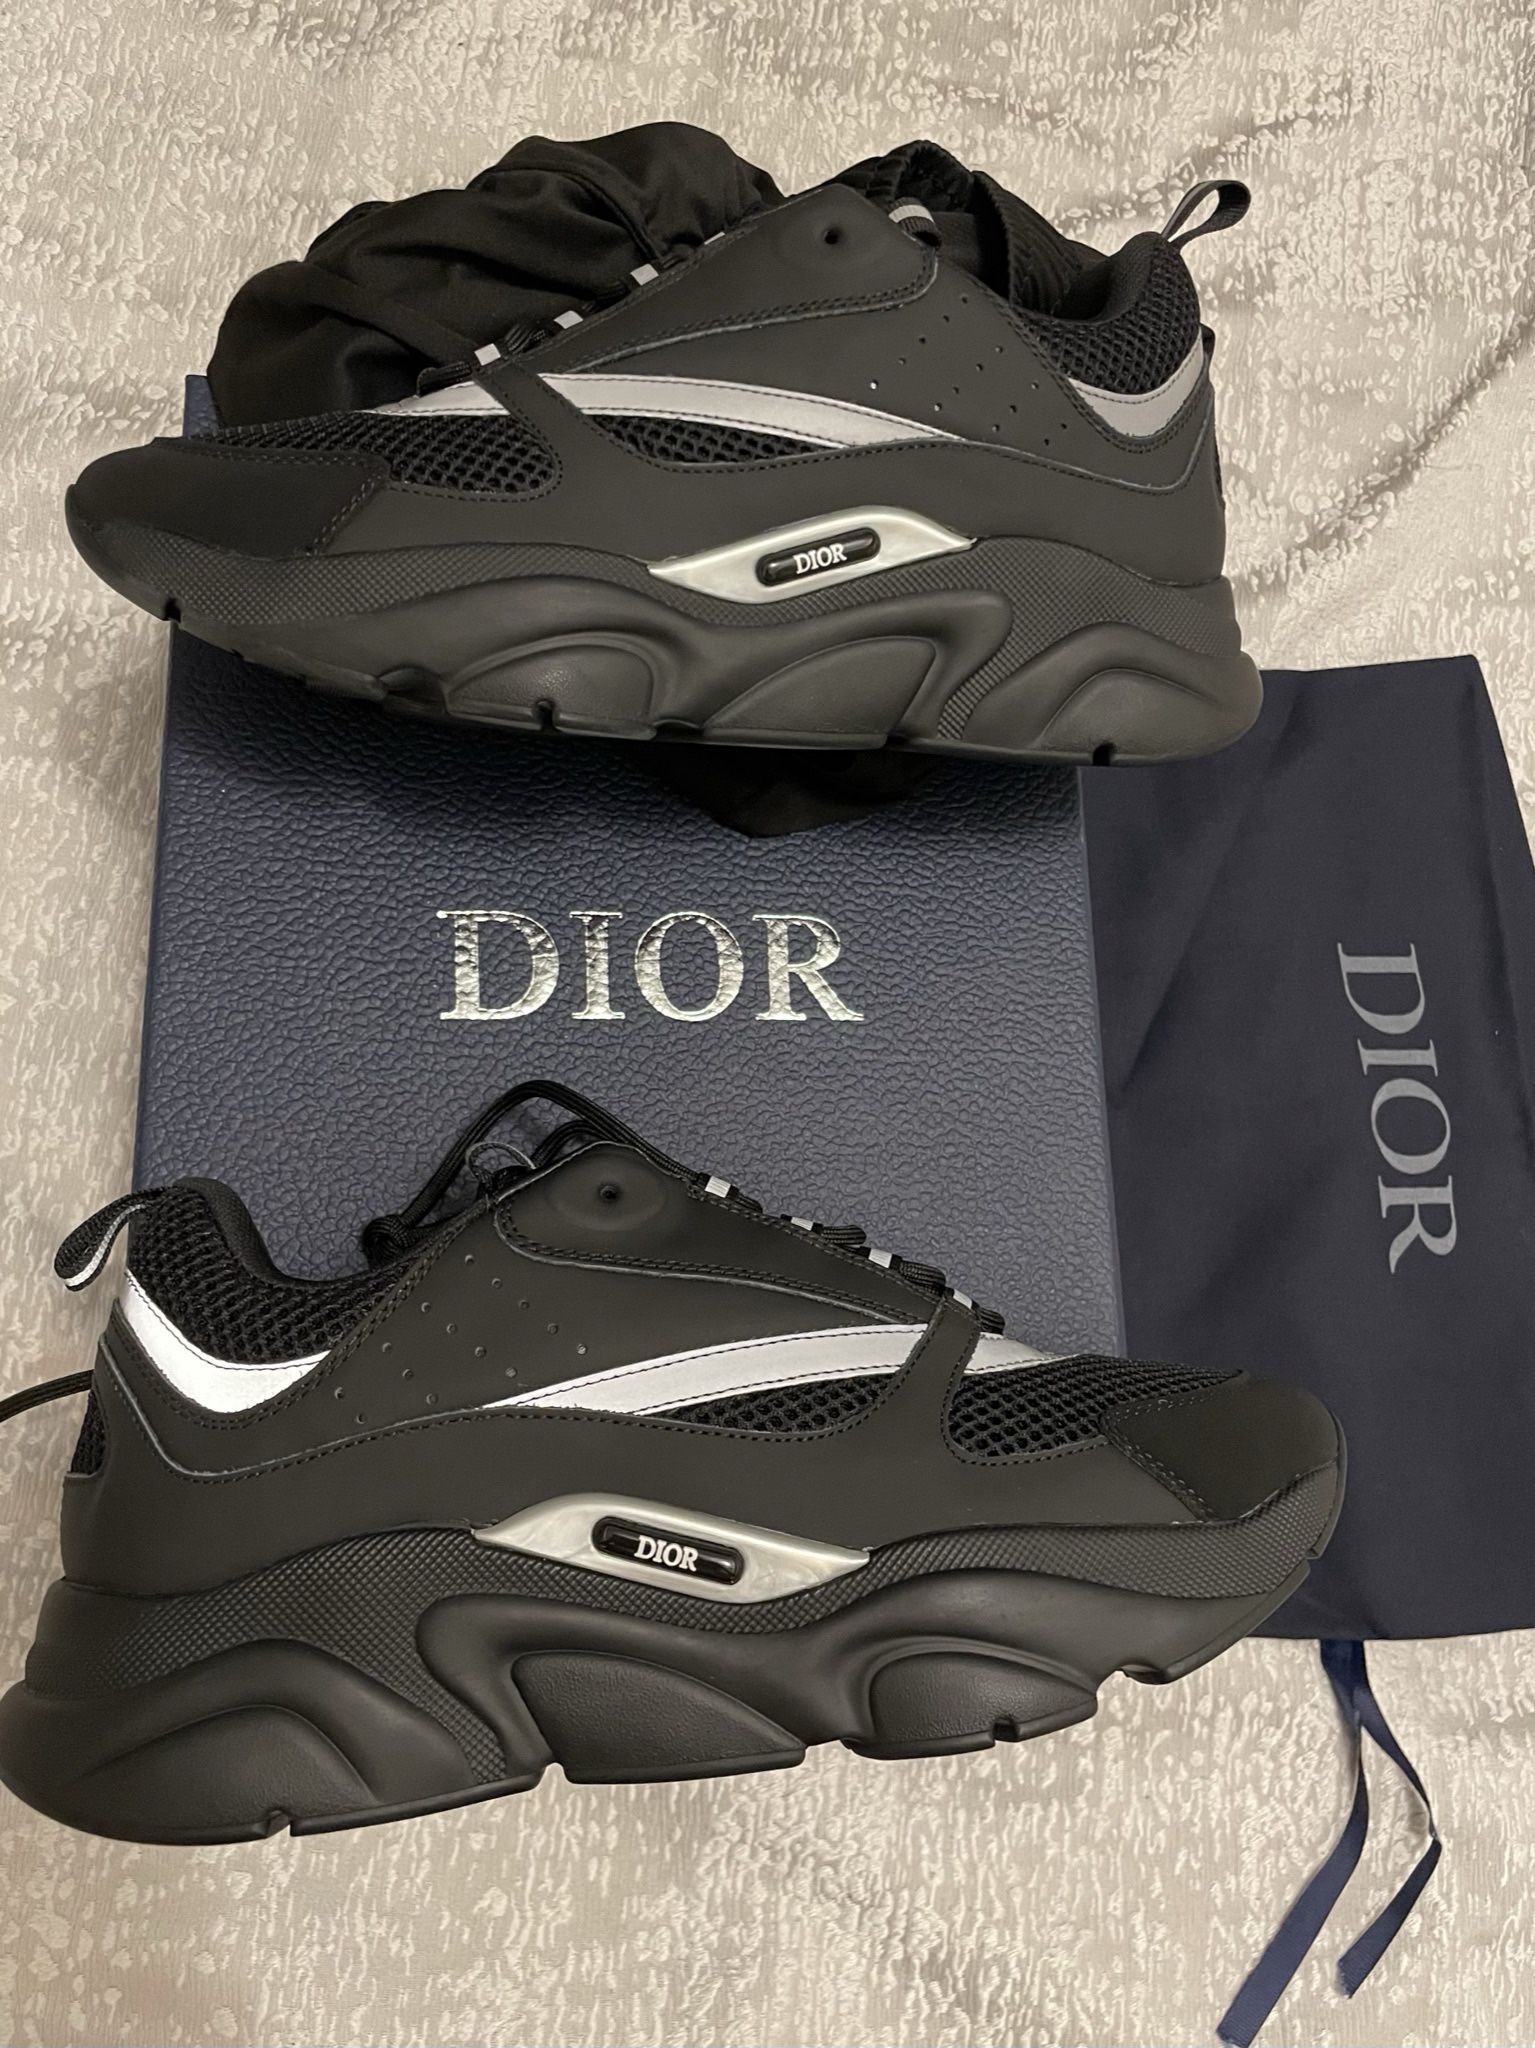 DIOR B22 NEW DESIGNER TRACK RUNNERS SHOES SNEAKERS MEN STYLE• SIZE 43 - EUROPE . 9.5   ⭐️⭐️⭐️⭐️⭐️